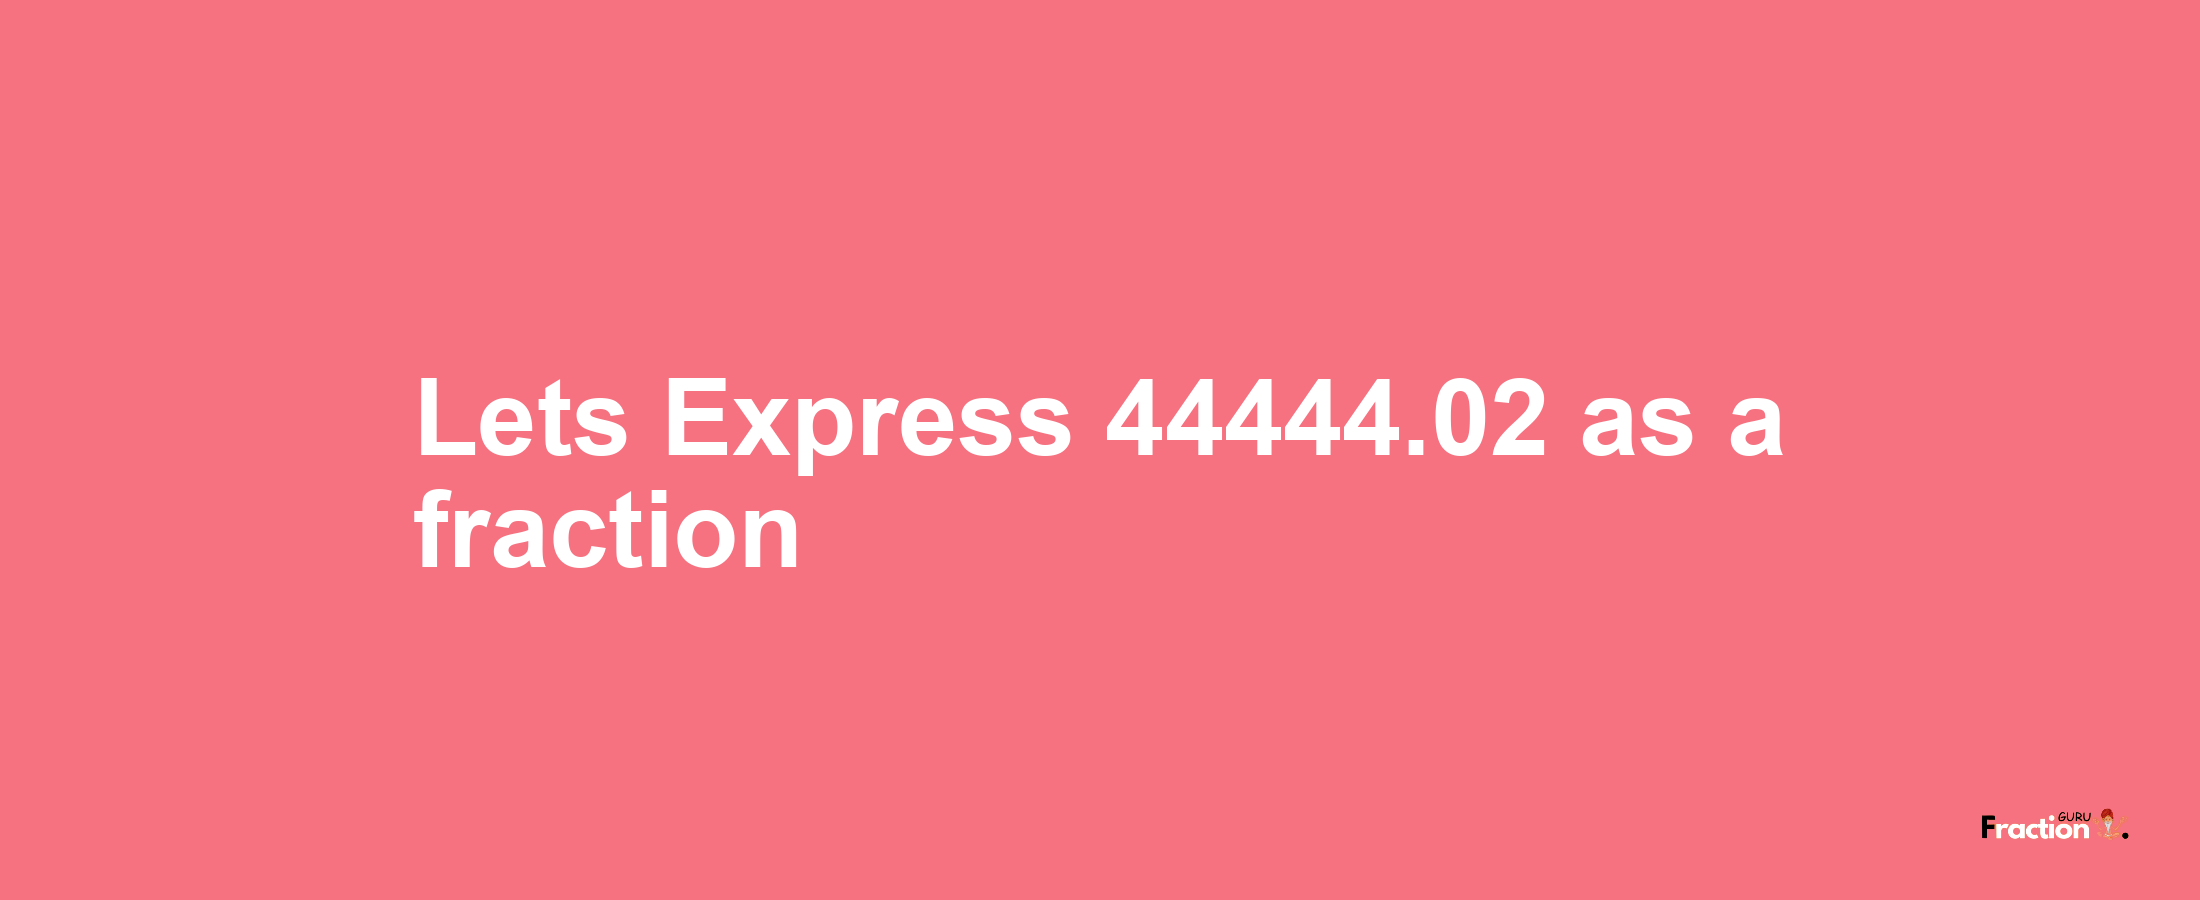 Lets Express 44444.02 as afraction